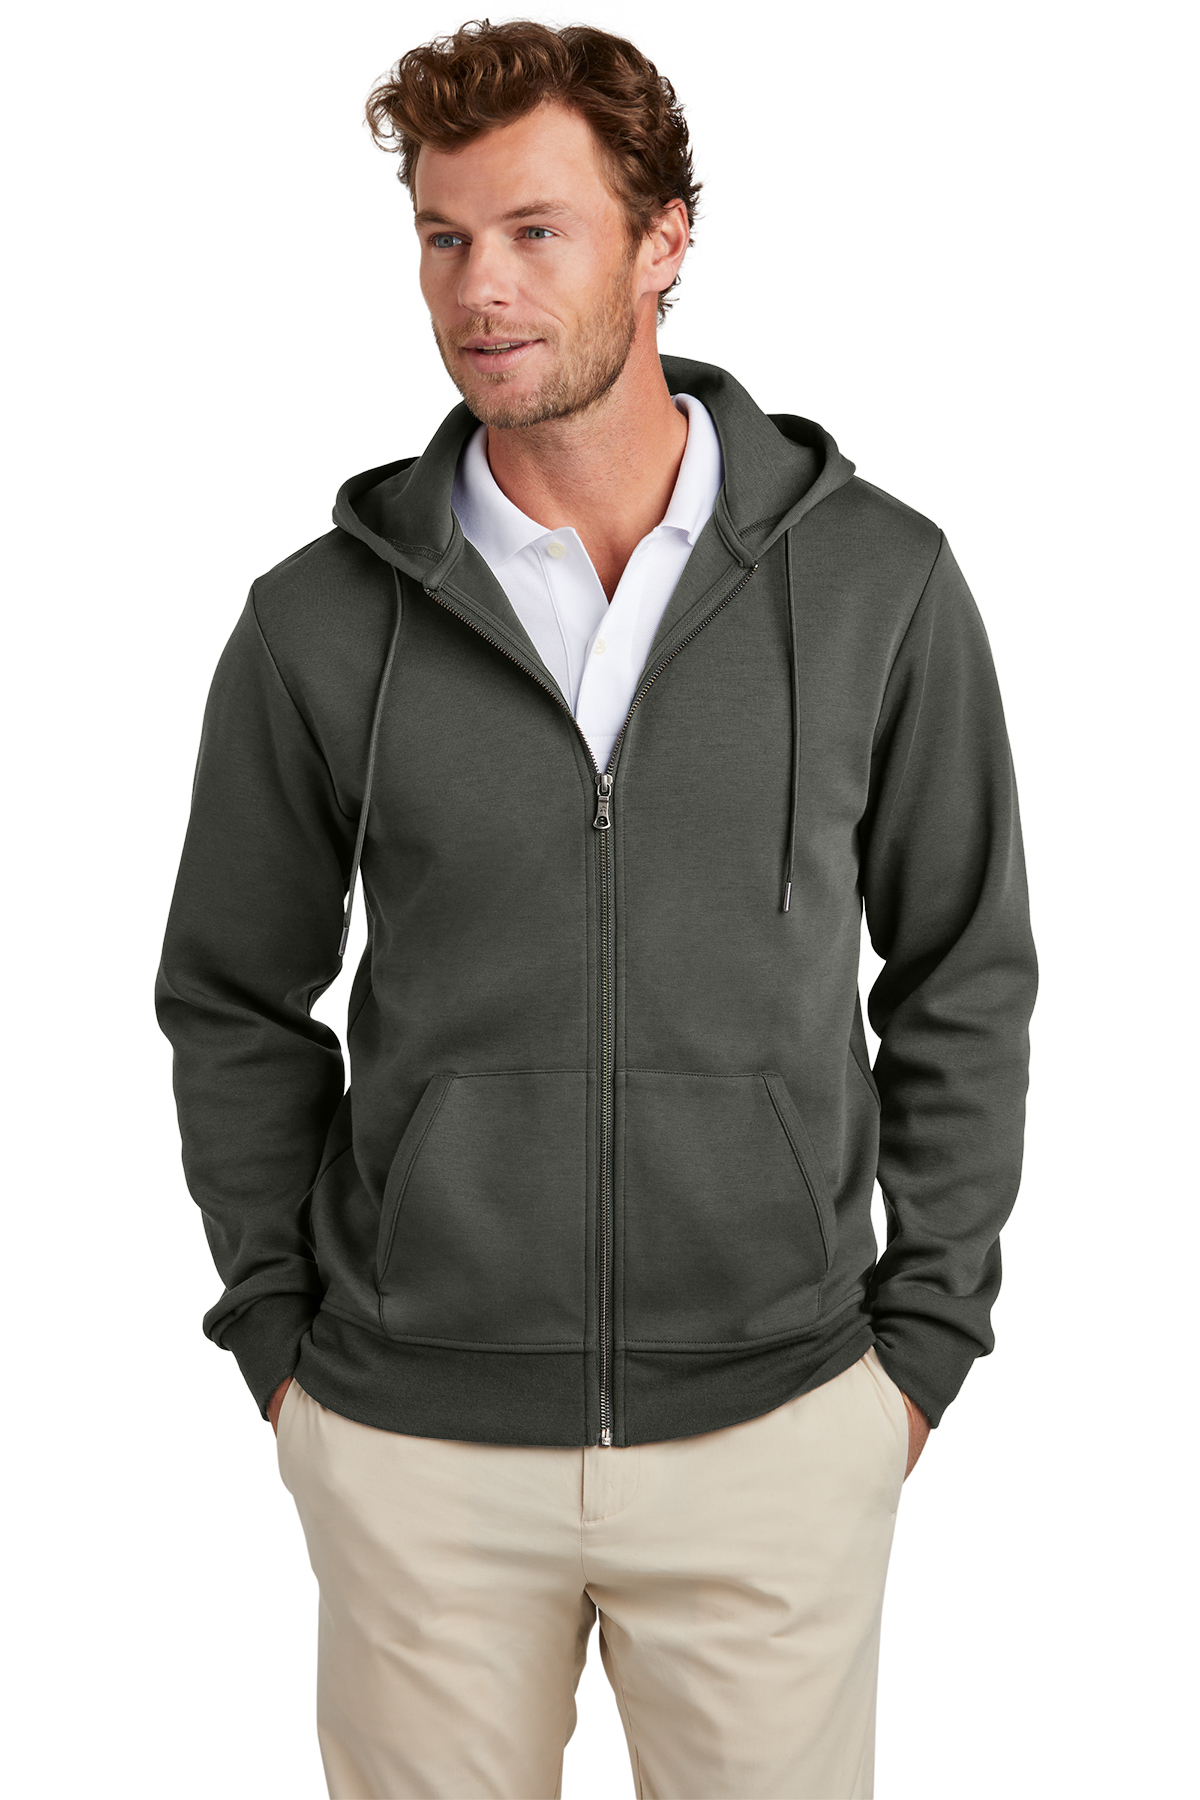 Brooks Brothers Double-Knit Full-Zip Hoodie | Product | SanMar